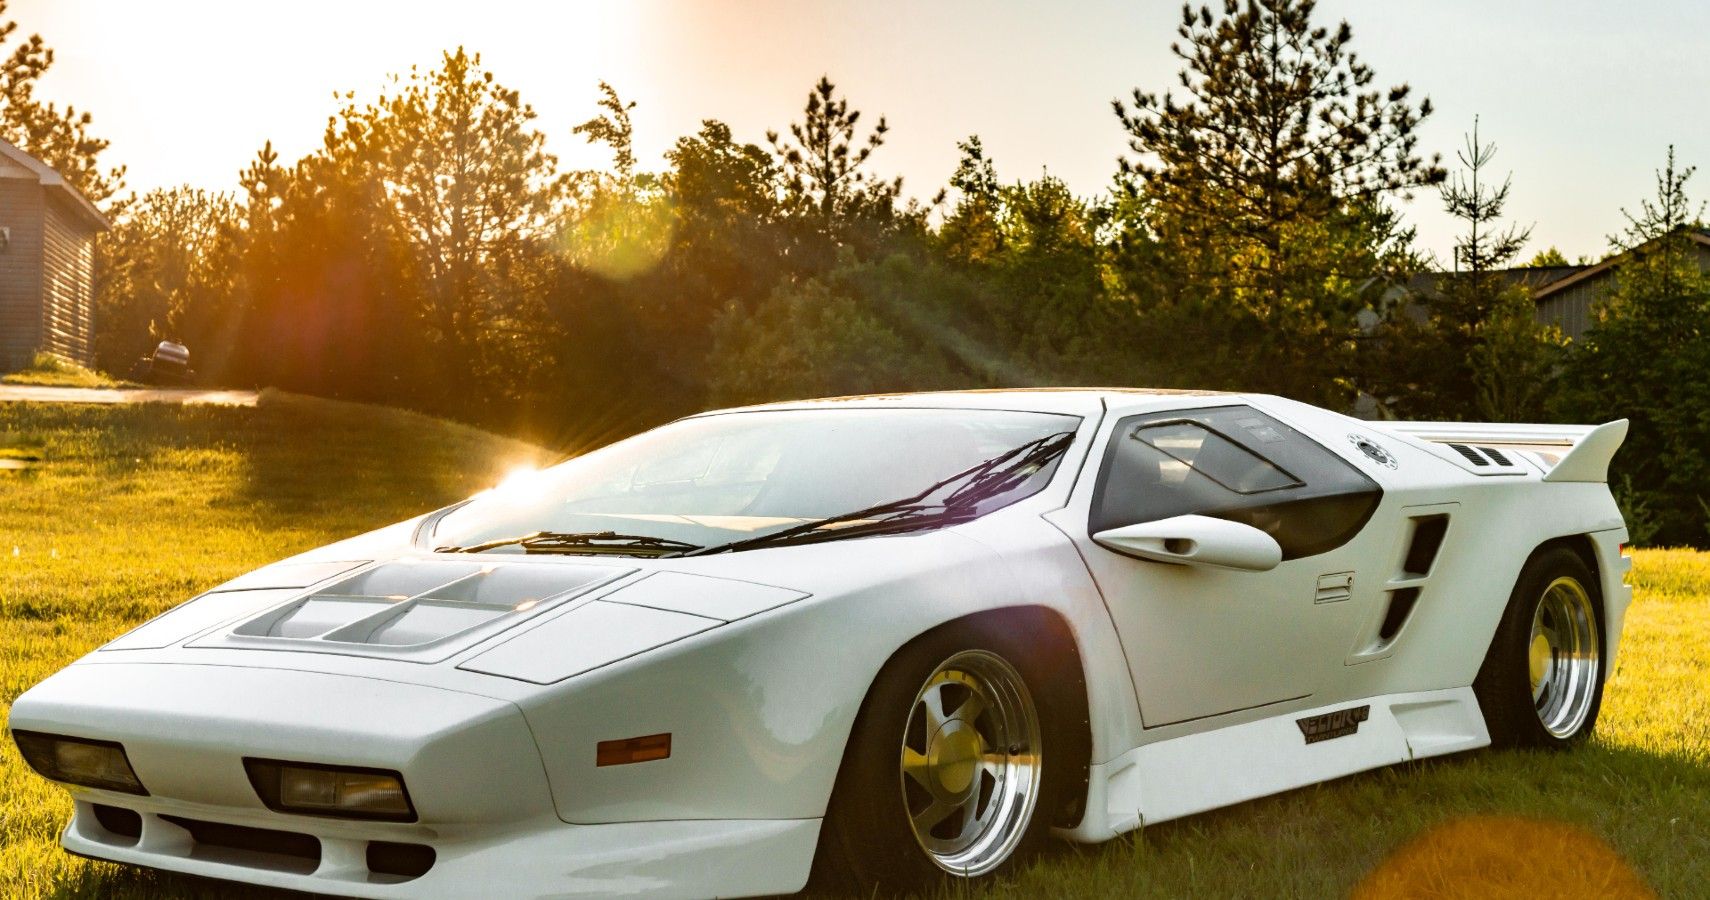 Vector W8: The All-American Supercar That Shocked The World插图